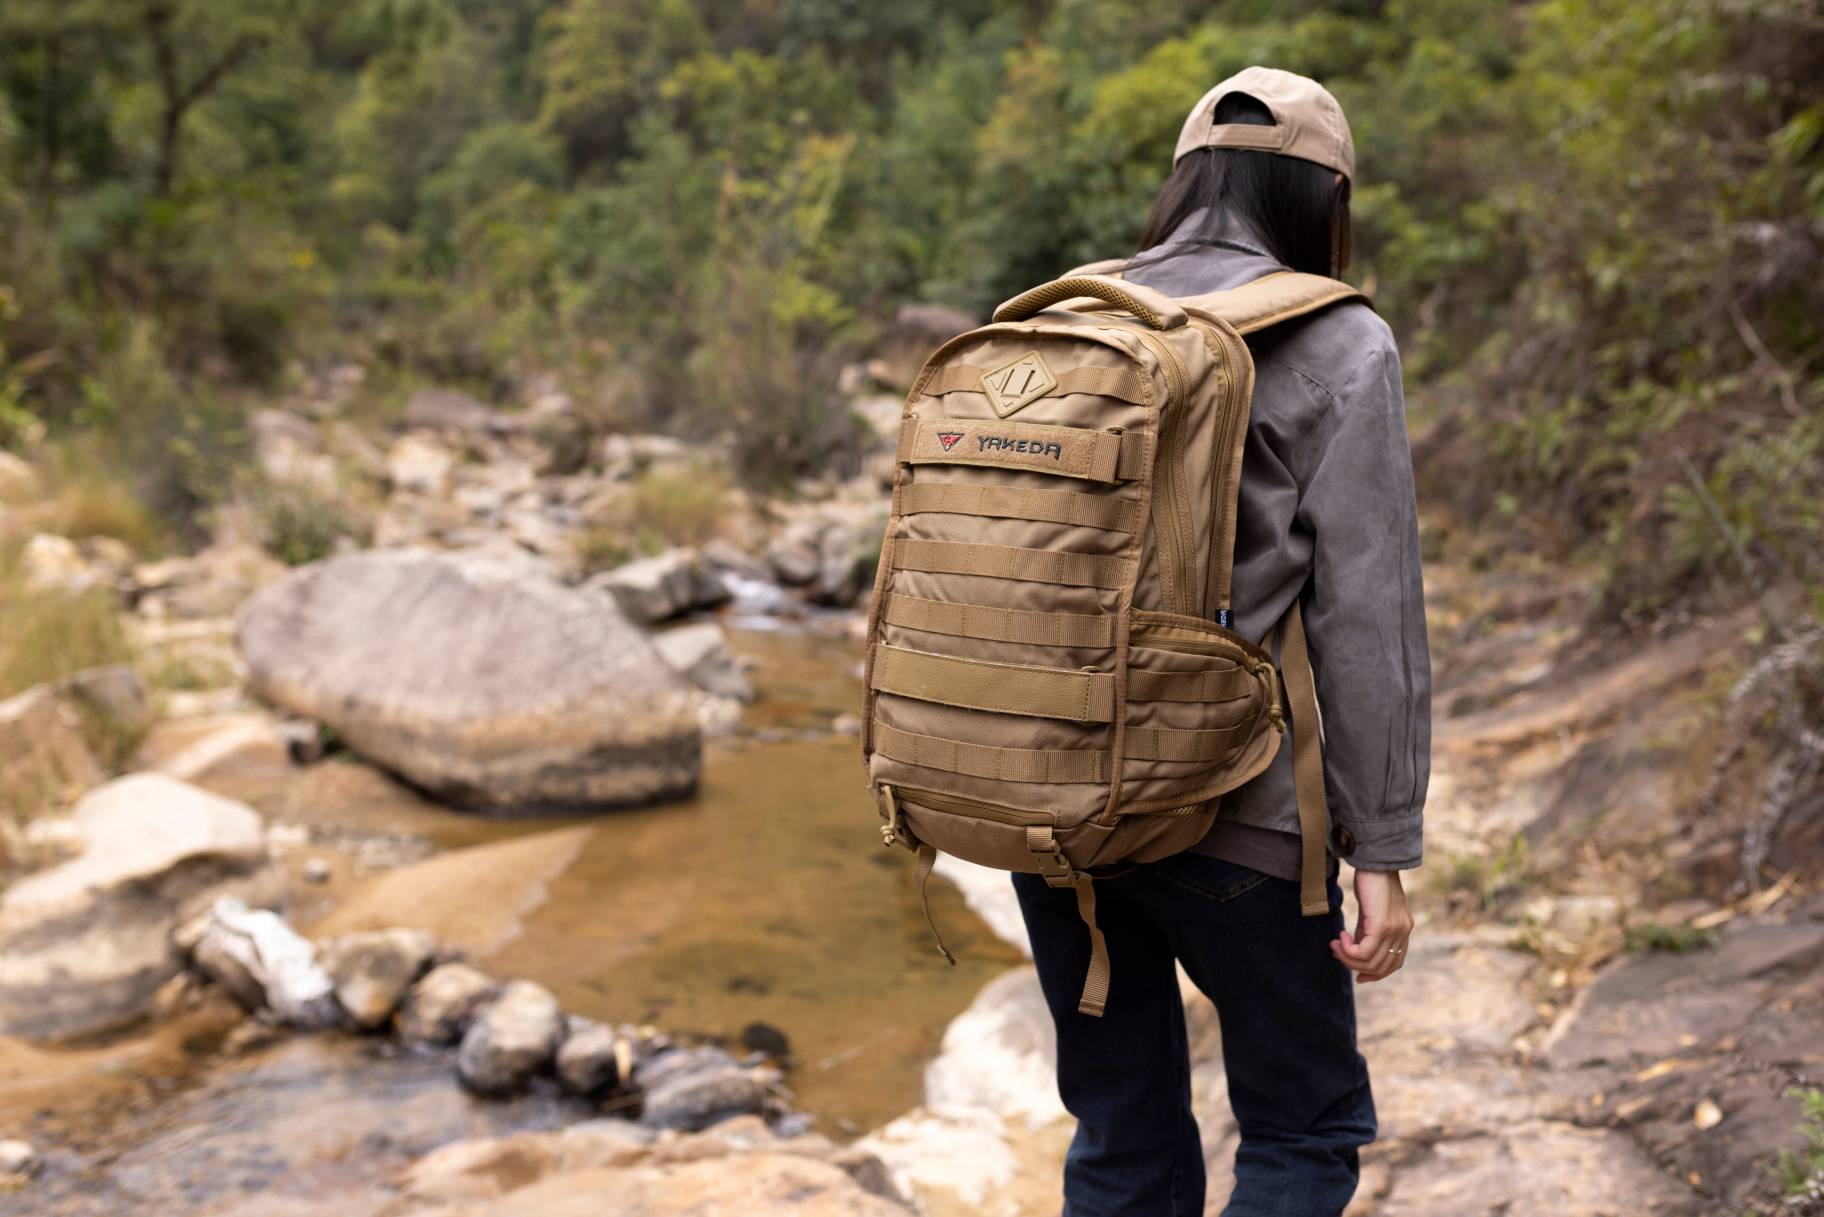 Have you ever heard of a modular backpack?